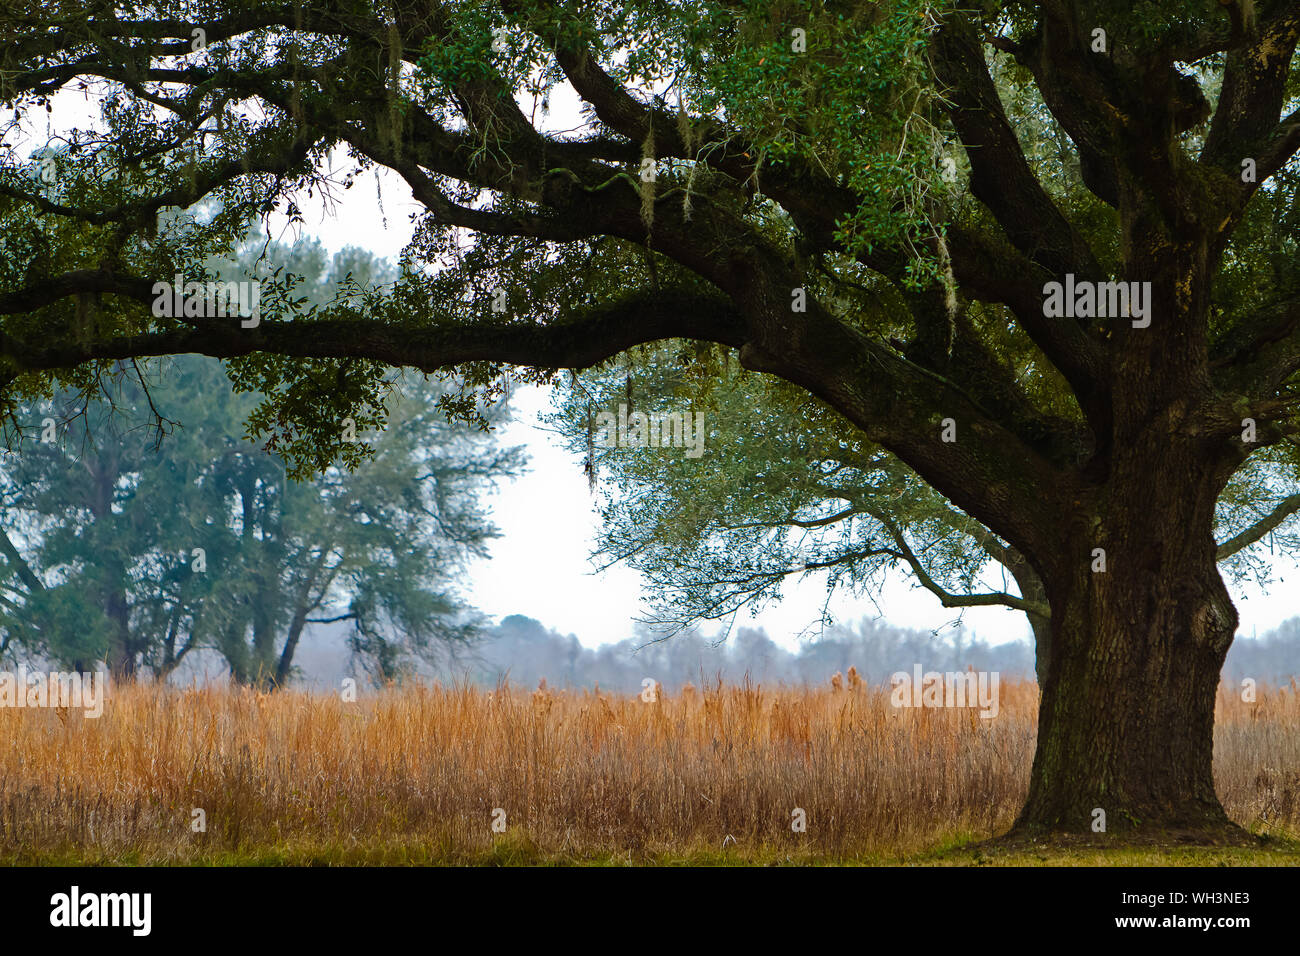 Oak Tree Growing On Field At Brazos Bend State Park Stock Photo